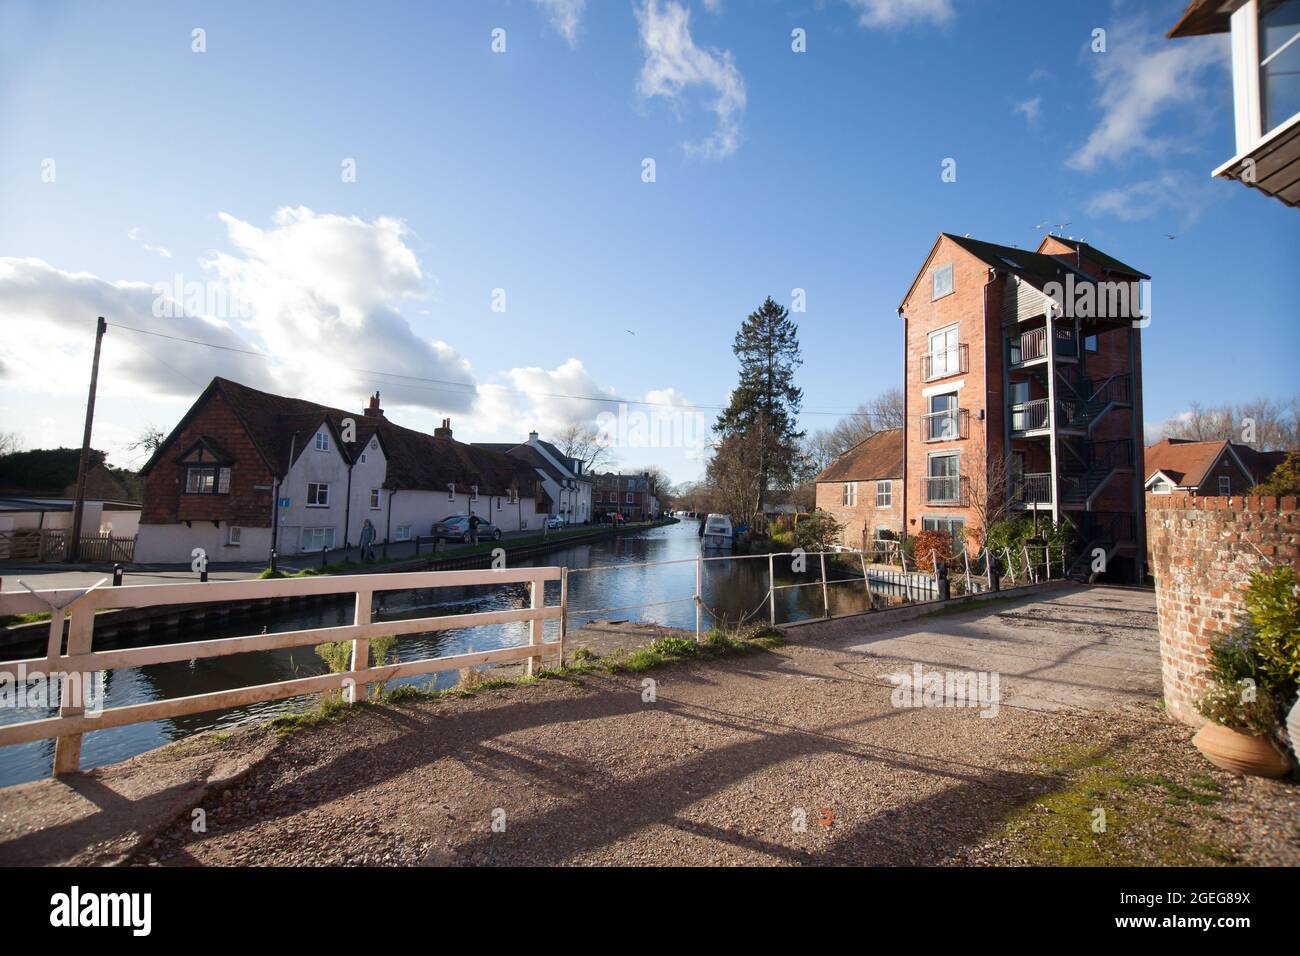 Views of the canal by the lock in Newbury, Berkshire in the UK, taken on the 19th November 2020 Stock Photo